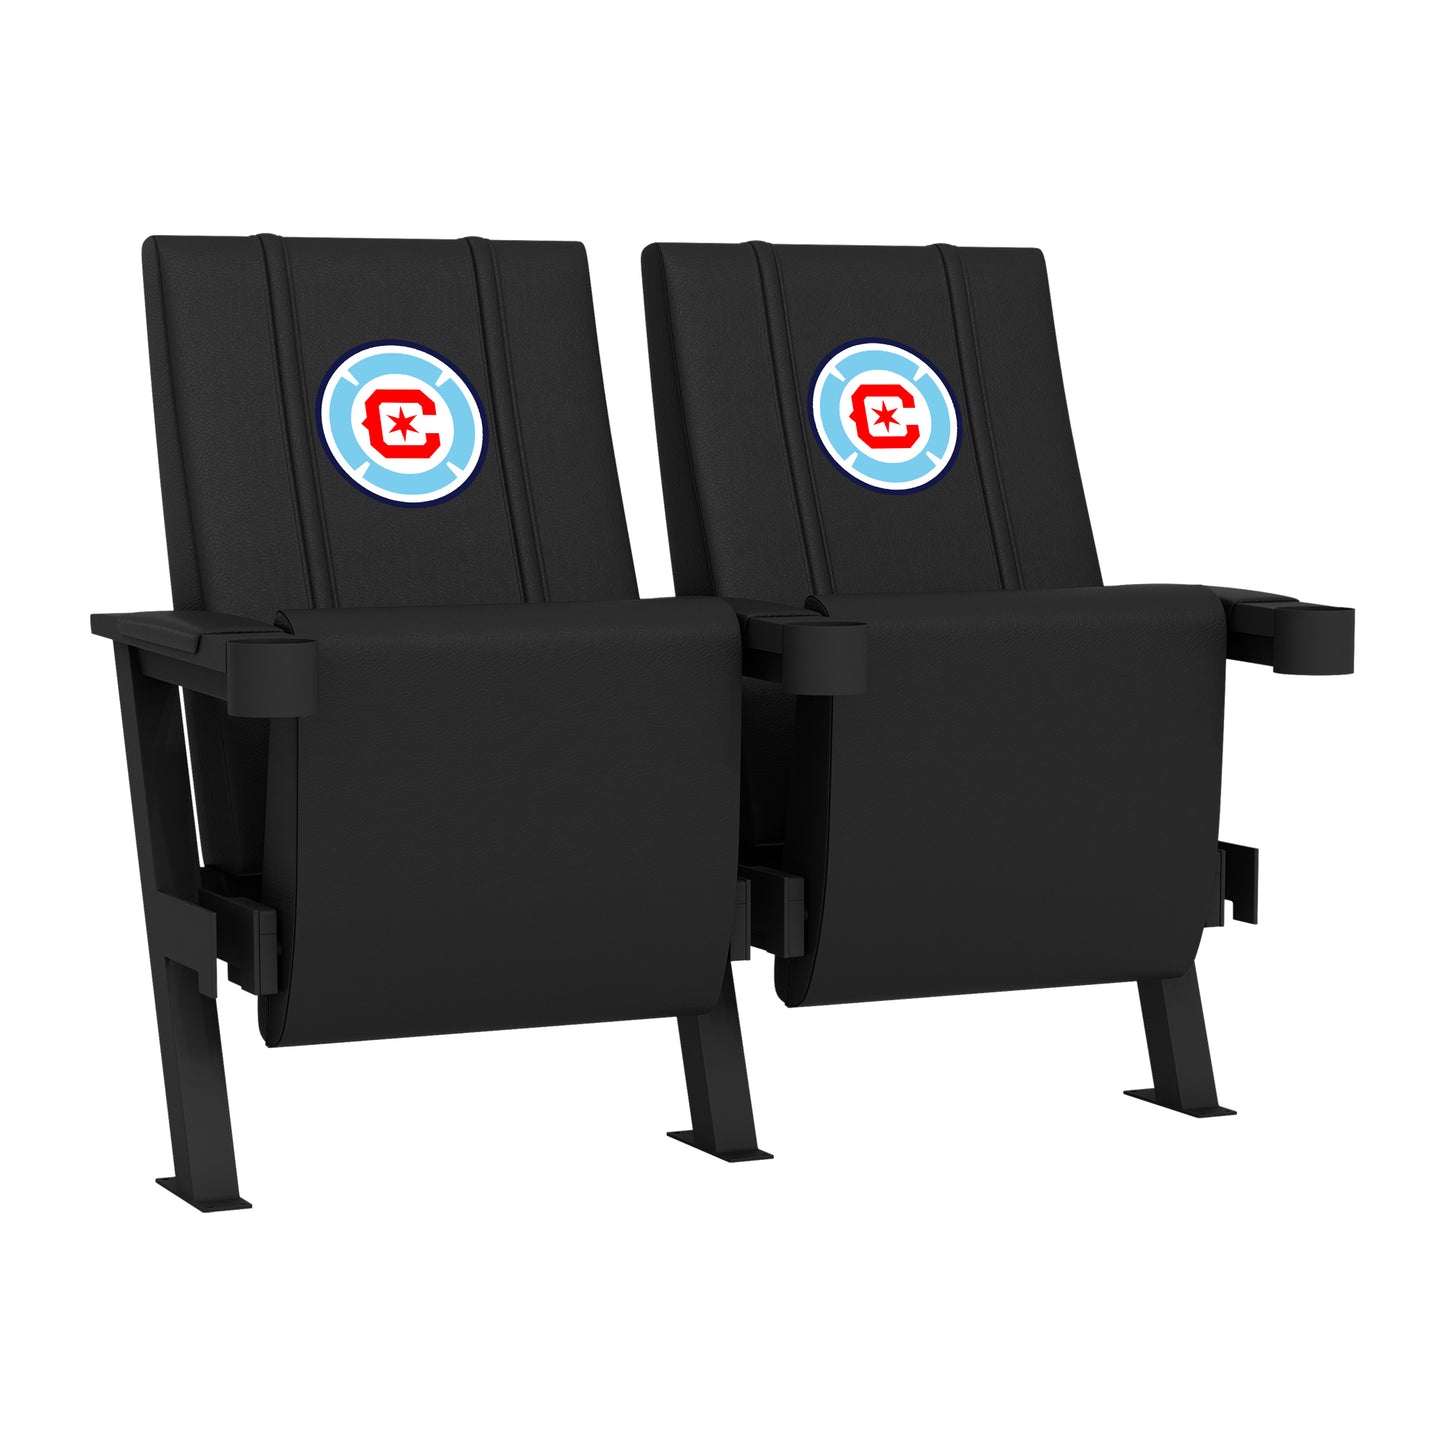 SuiteMax 3.5 VIP Seats with Chicago Fire FC Logo